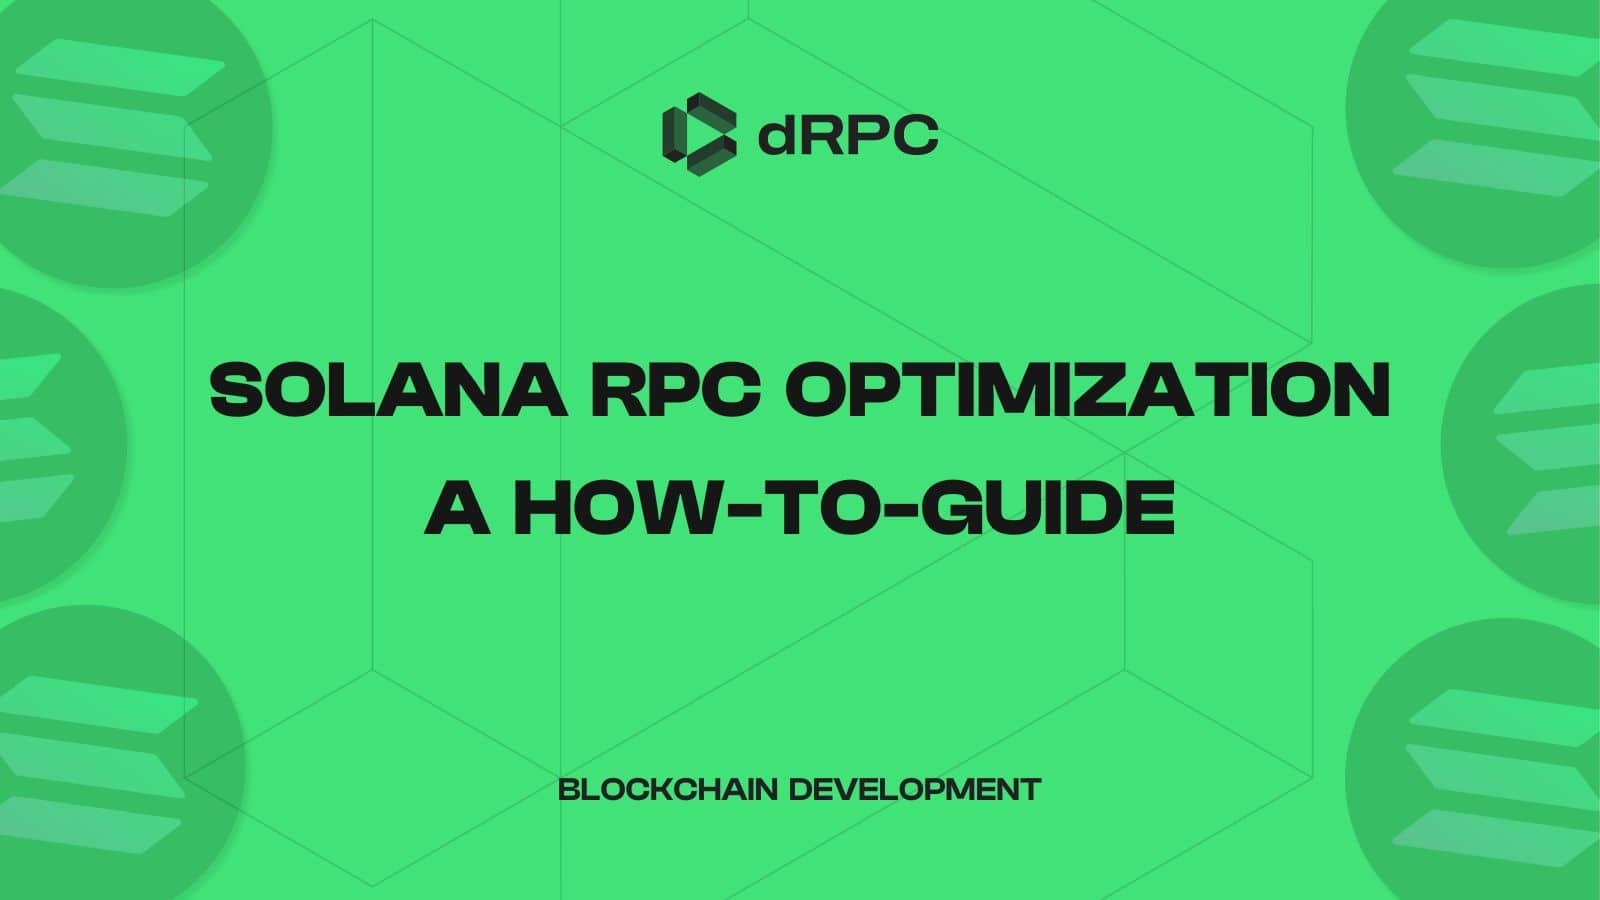 Solana RPC Optimization: A How-to-Guide